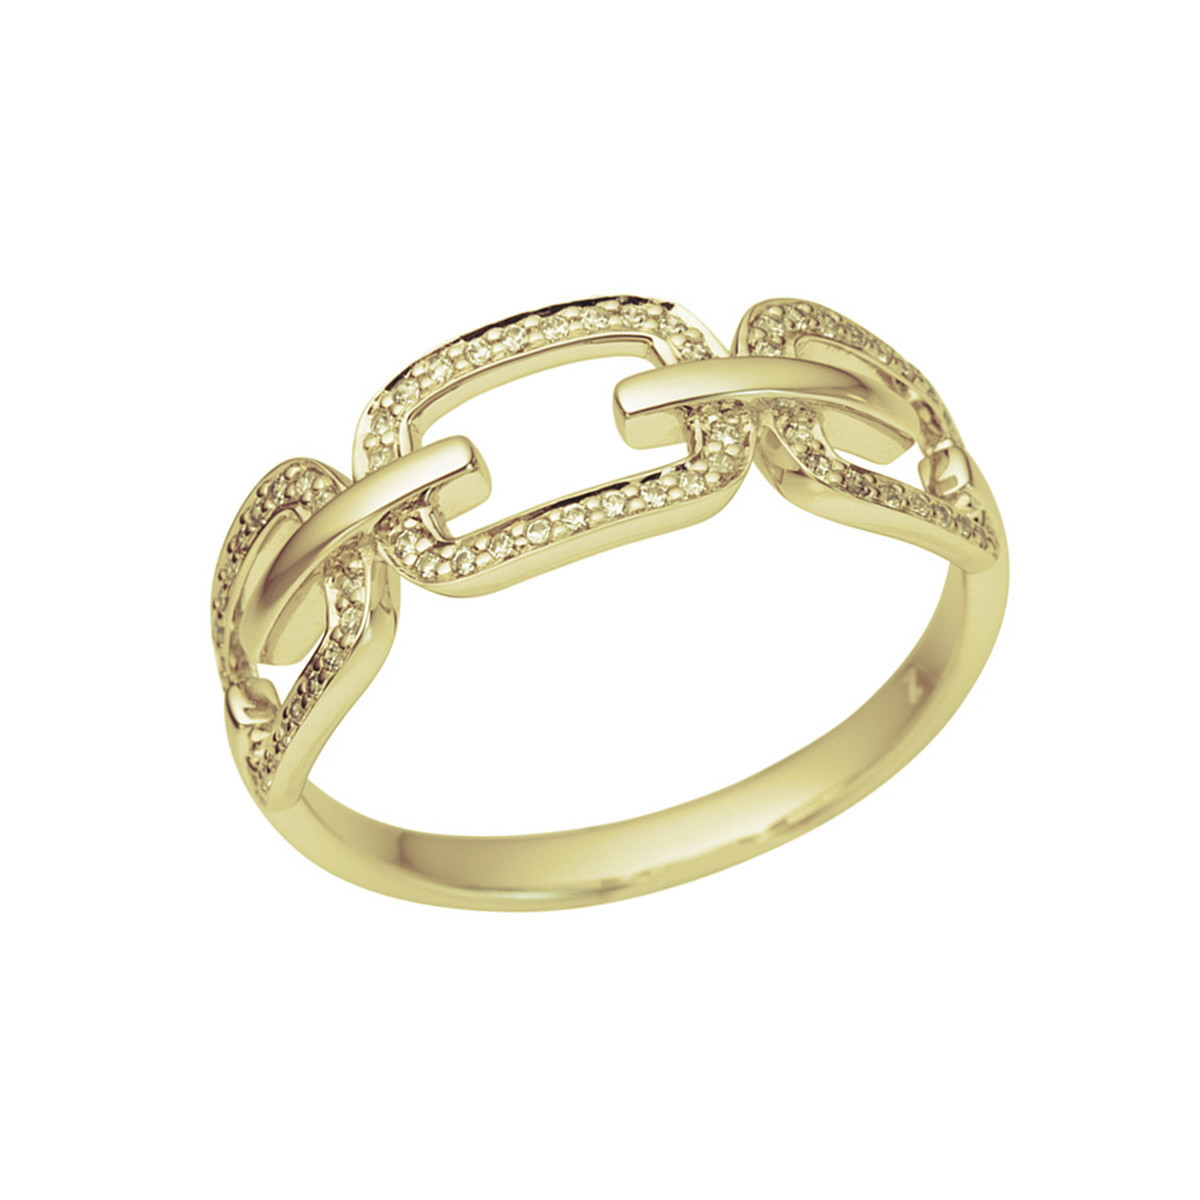 GOLD RING WITH DIAMOND